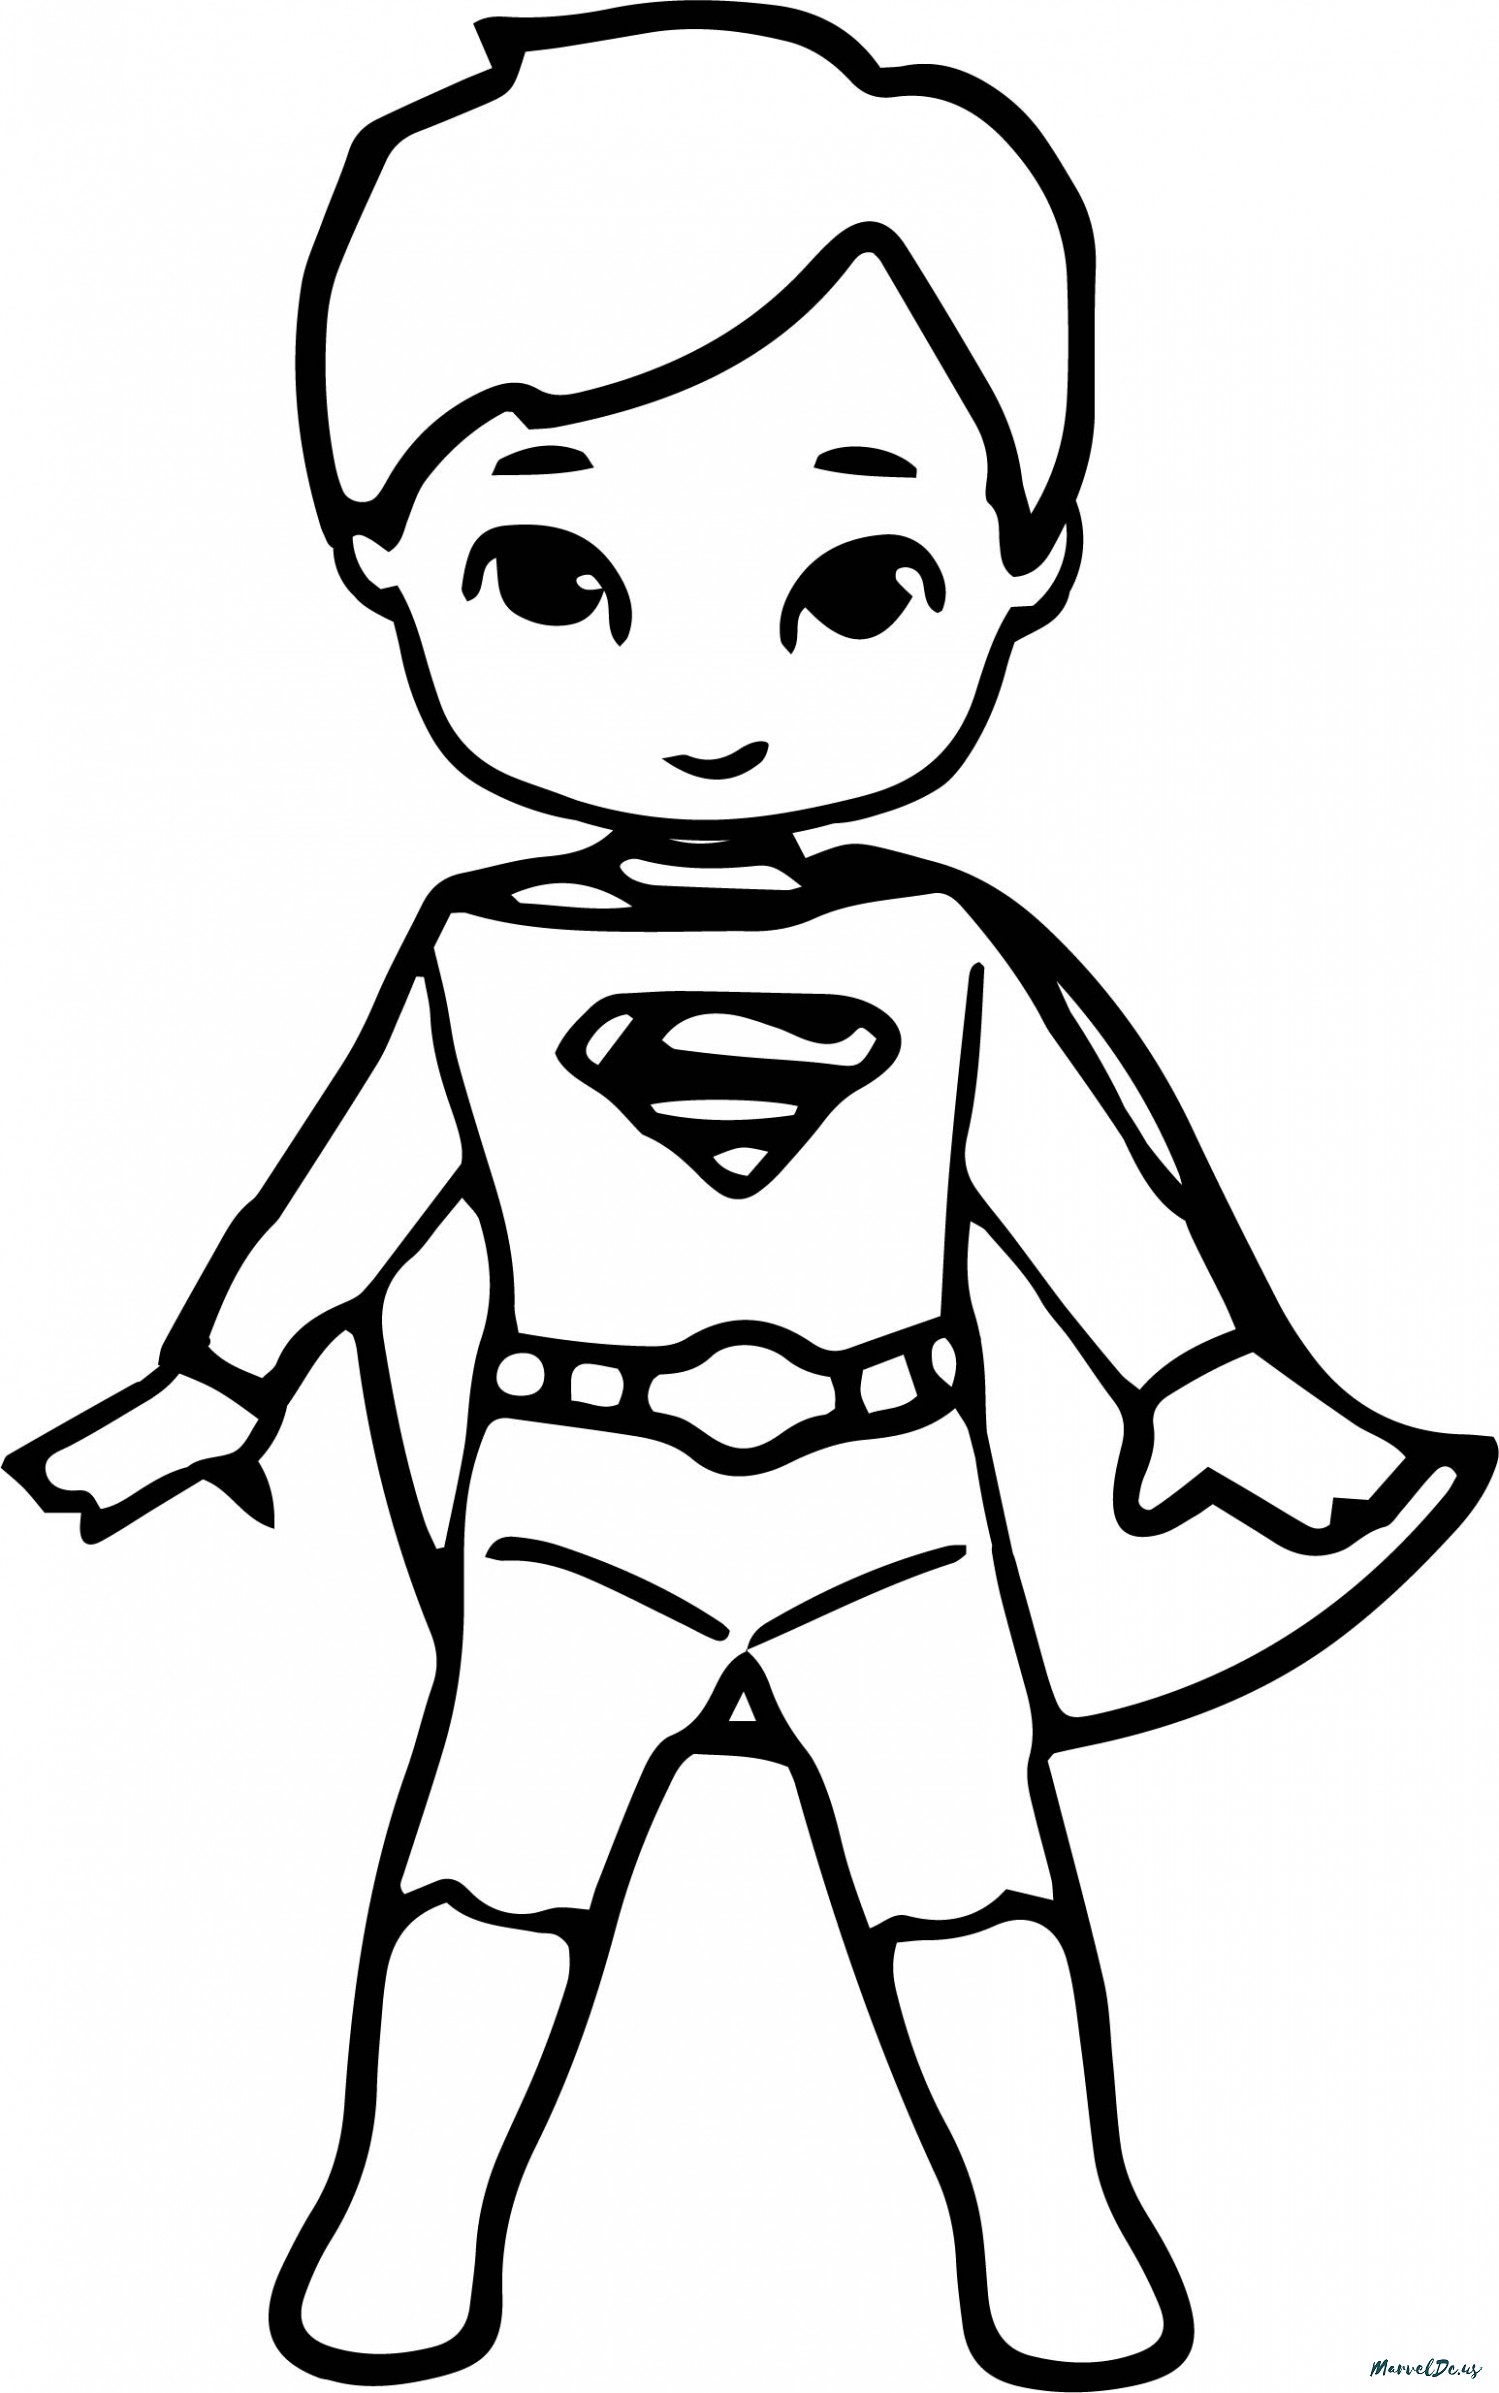 Generic Superhero Coloring Pages Coloring Pages